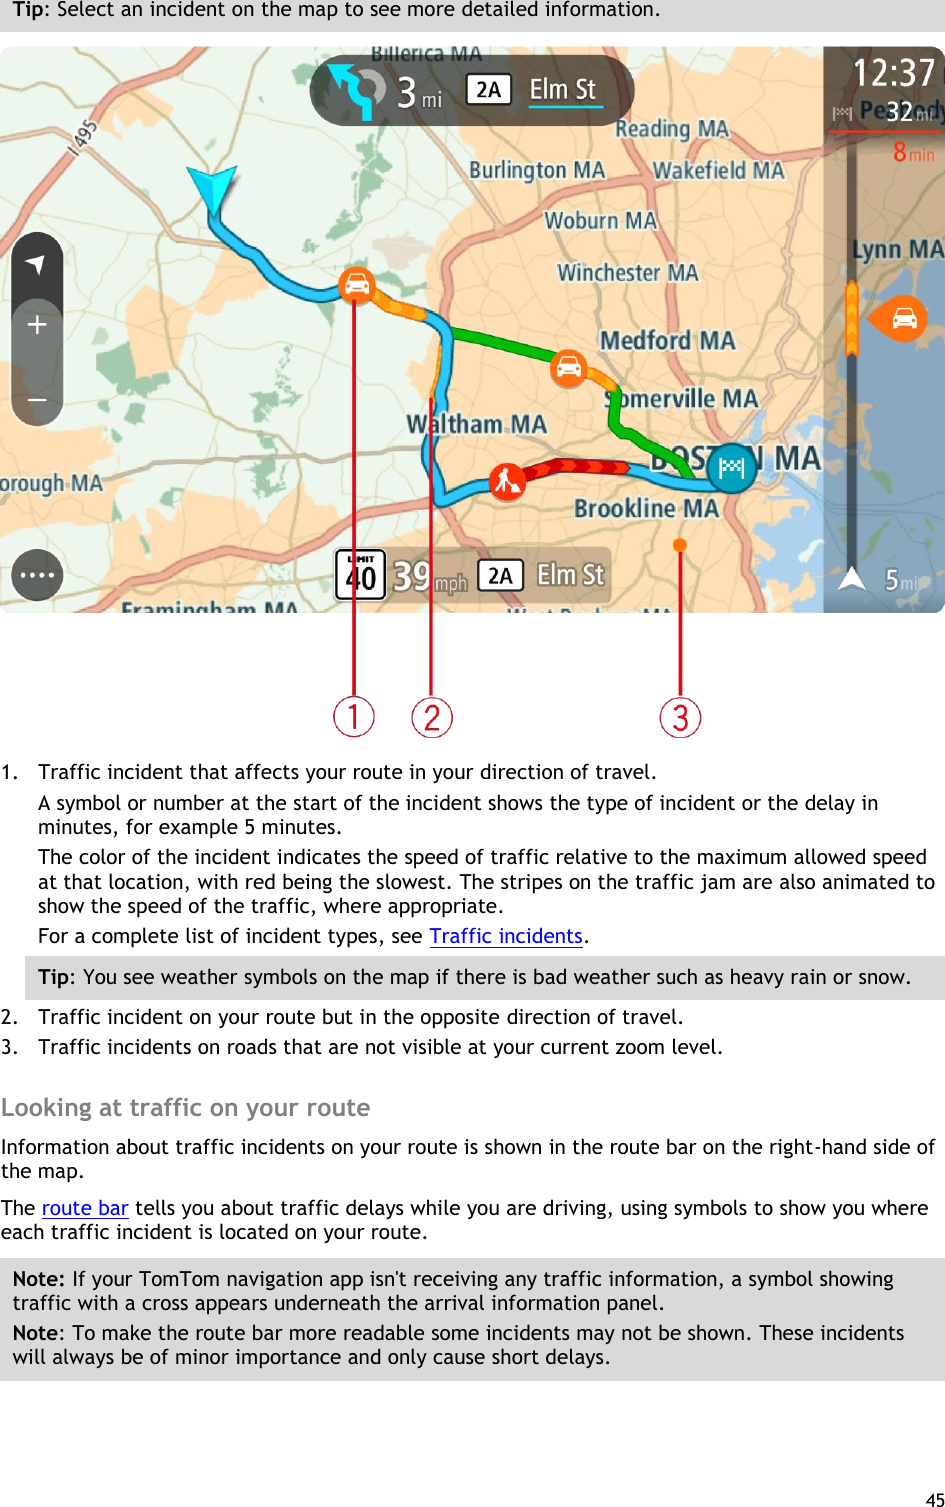  45  Tip: Select an incident on the map to see more detailed information.  1. Traffic incident that affects your route in your direction of travel. A symbol or number at the start of the incident shows the type of incident or the delay in minutes, for example 5 minutes.   The color of the incident indicates the speed of traffic relative to the maximum allowed speed at that location, with red being the slowest. The stripes on the traffic jam are also animated to show the speed of the traffic, where appropriate.   For a complete list of incident types, see Traffic incidents. Tip: You see weather symbols on the map if there is bad weather such as heavy rain or snow. 2. Traffic incident on your route but in the opposite direction of travel. 3. Traffic incidents on roads that are not visible at your current zoom level.  Looking at traffic on your route Information about traffic incidents on your route is shown in the route bar on the right-hand side of the map. The route bar tells you about traffic delays while you are driving, using symbols to show you where each traffic incident is located on your route. Note: If your TomTom navigation app isn&apos;t receiving any traffic information, a symbol showing traffic with a cross appears underneath the arrival information panel. Note: To make the route bar more readable some incidents may not be shown. These incidents will always be of minor importance and only cause short delays. 